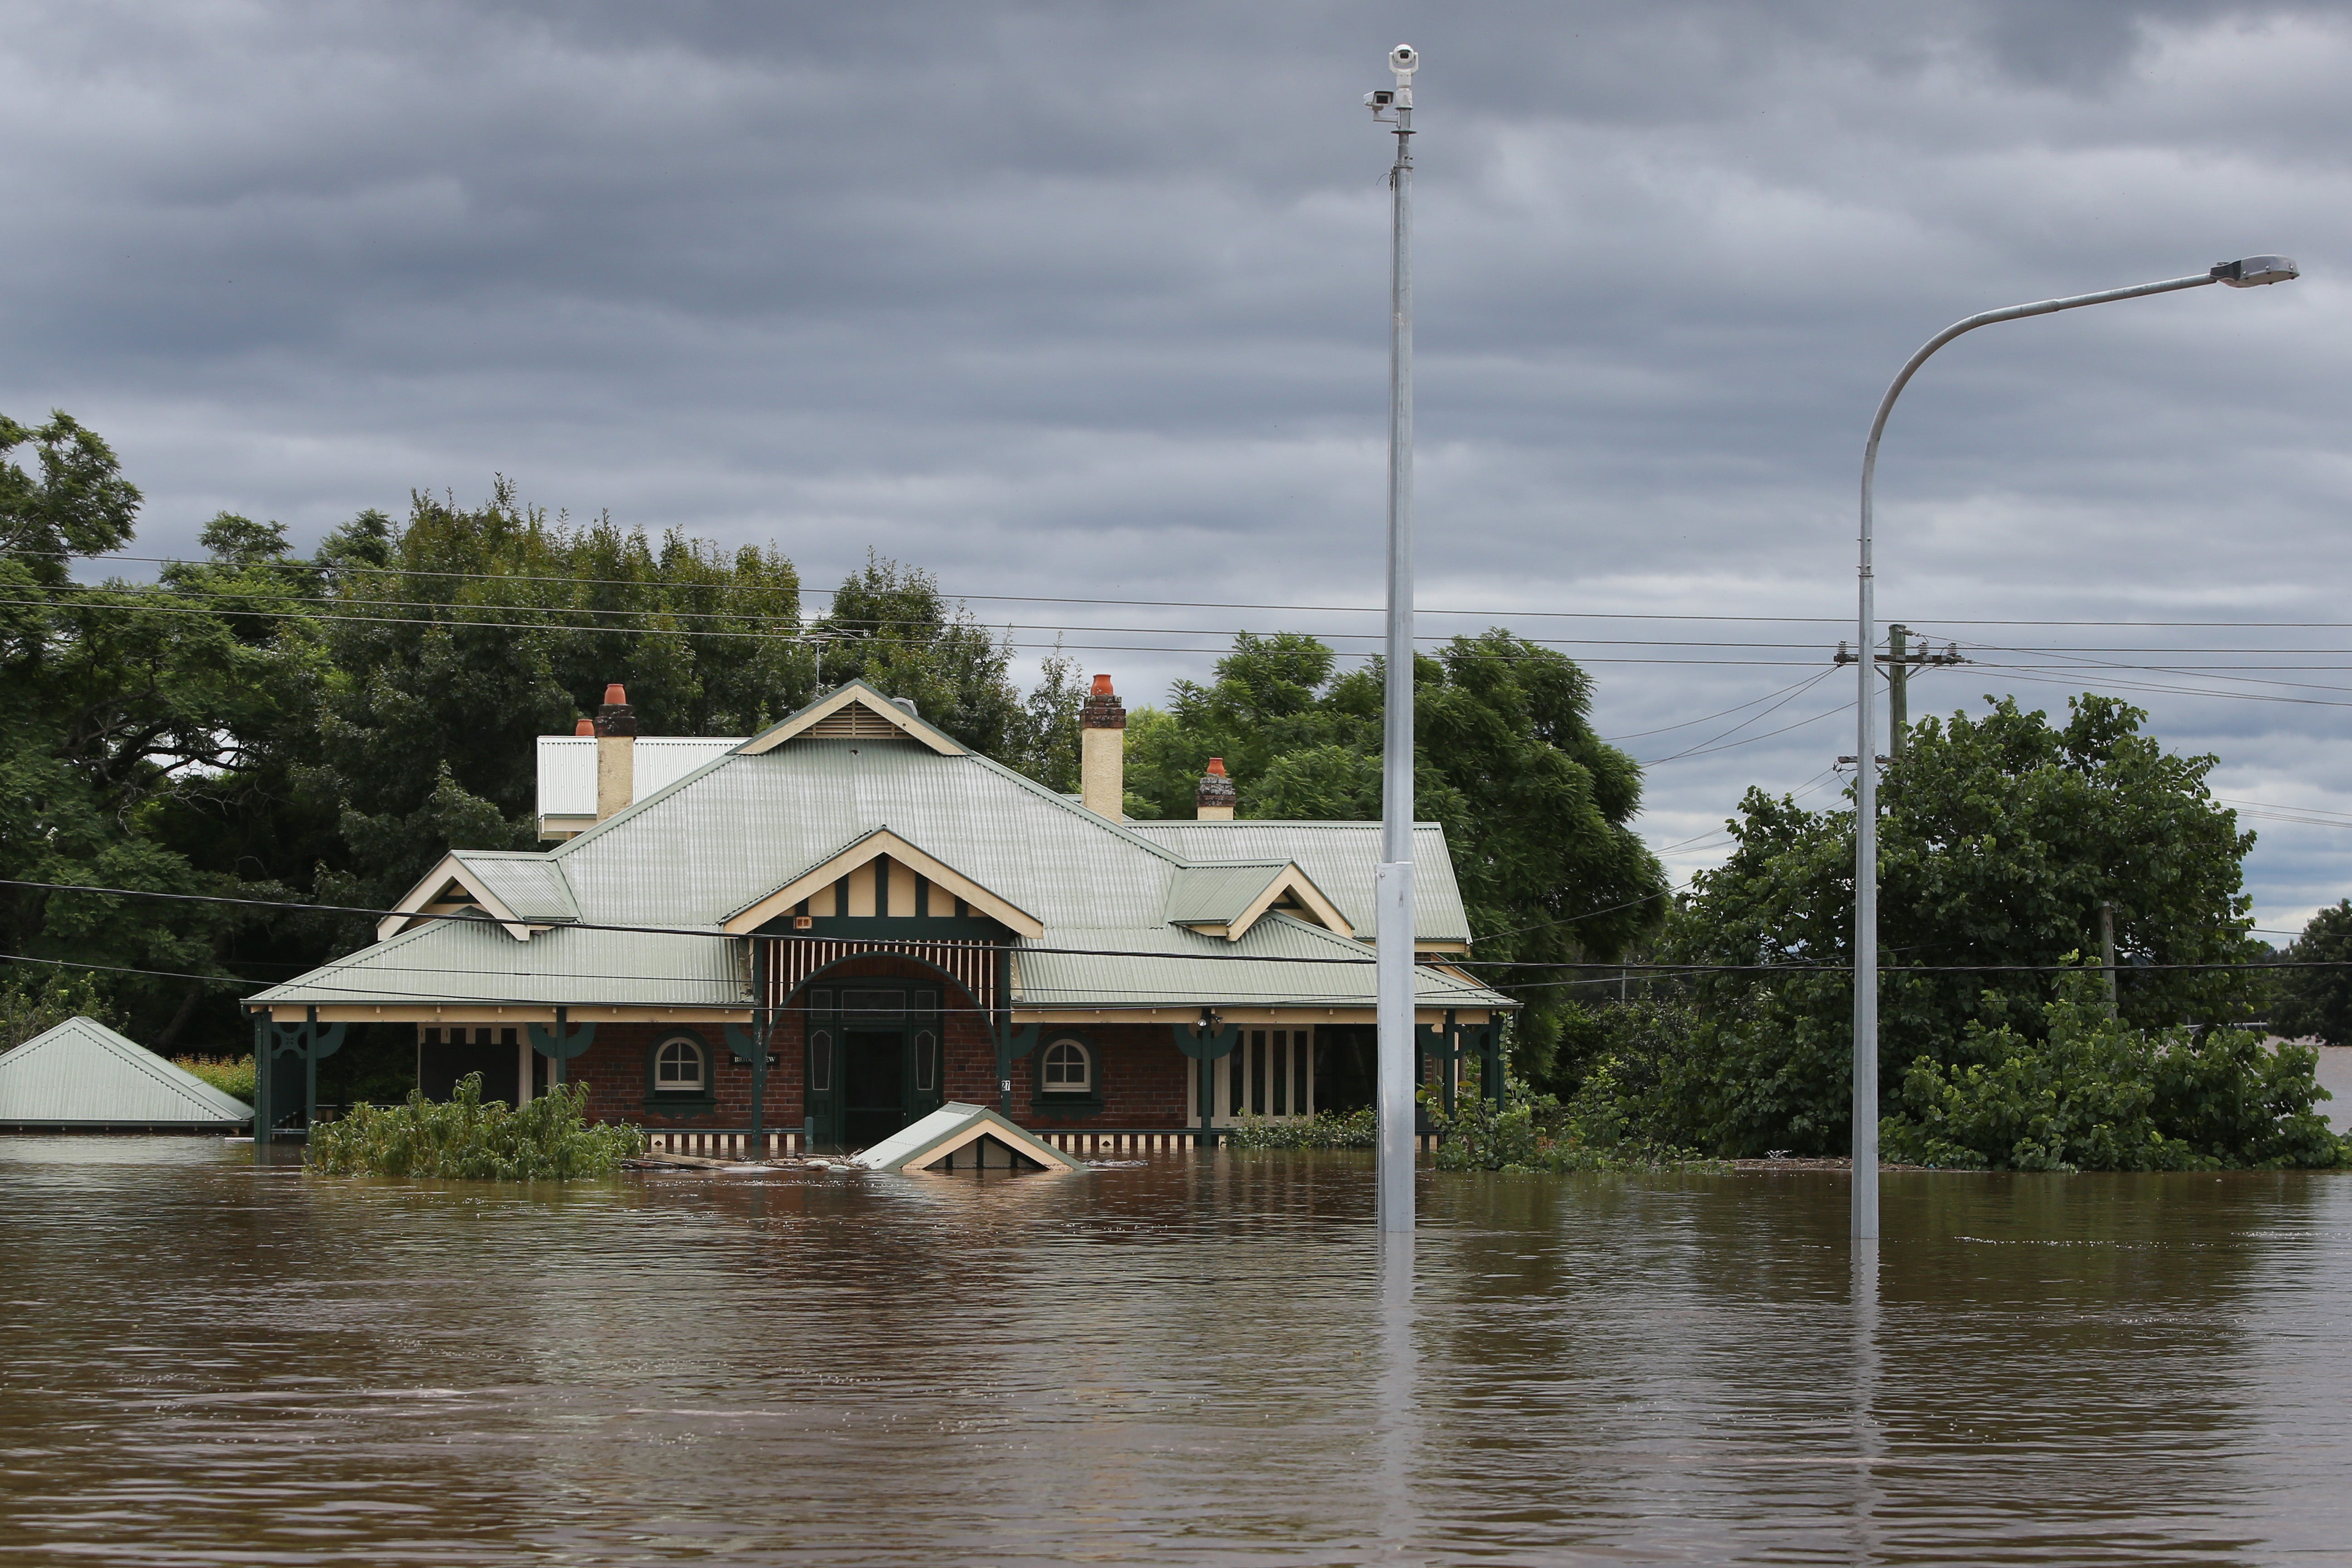 A home is seen inundated by floodwaters along the Hawkesbury River in Windsor on March 9, 2022 in Sydney, Australia. (Photo: Lisa Maree Williams, Getty Images)